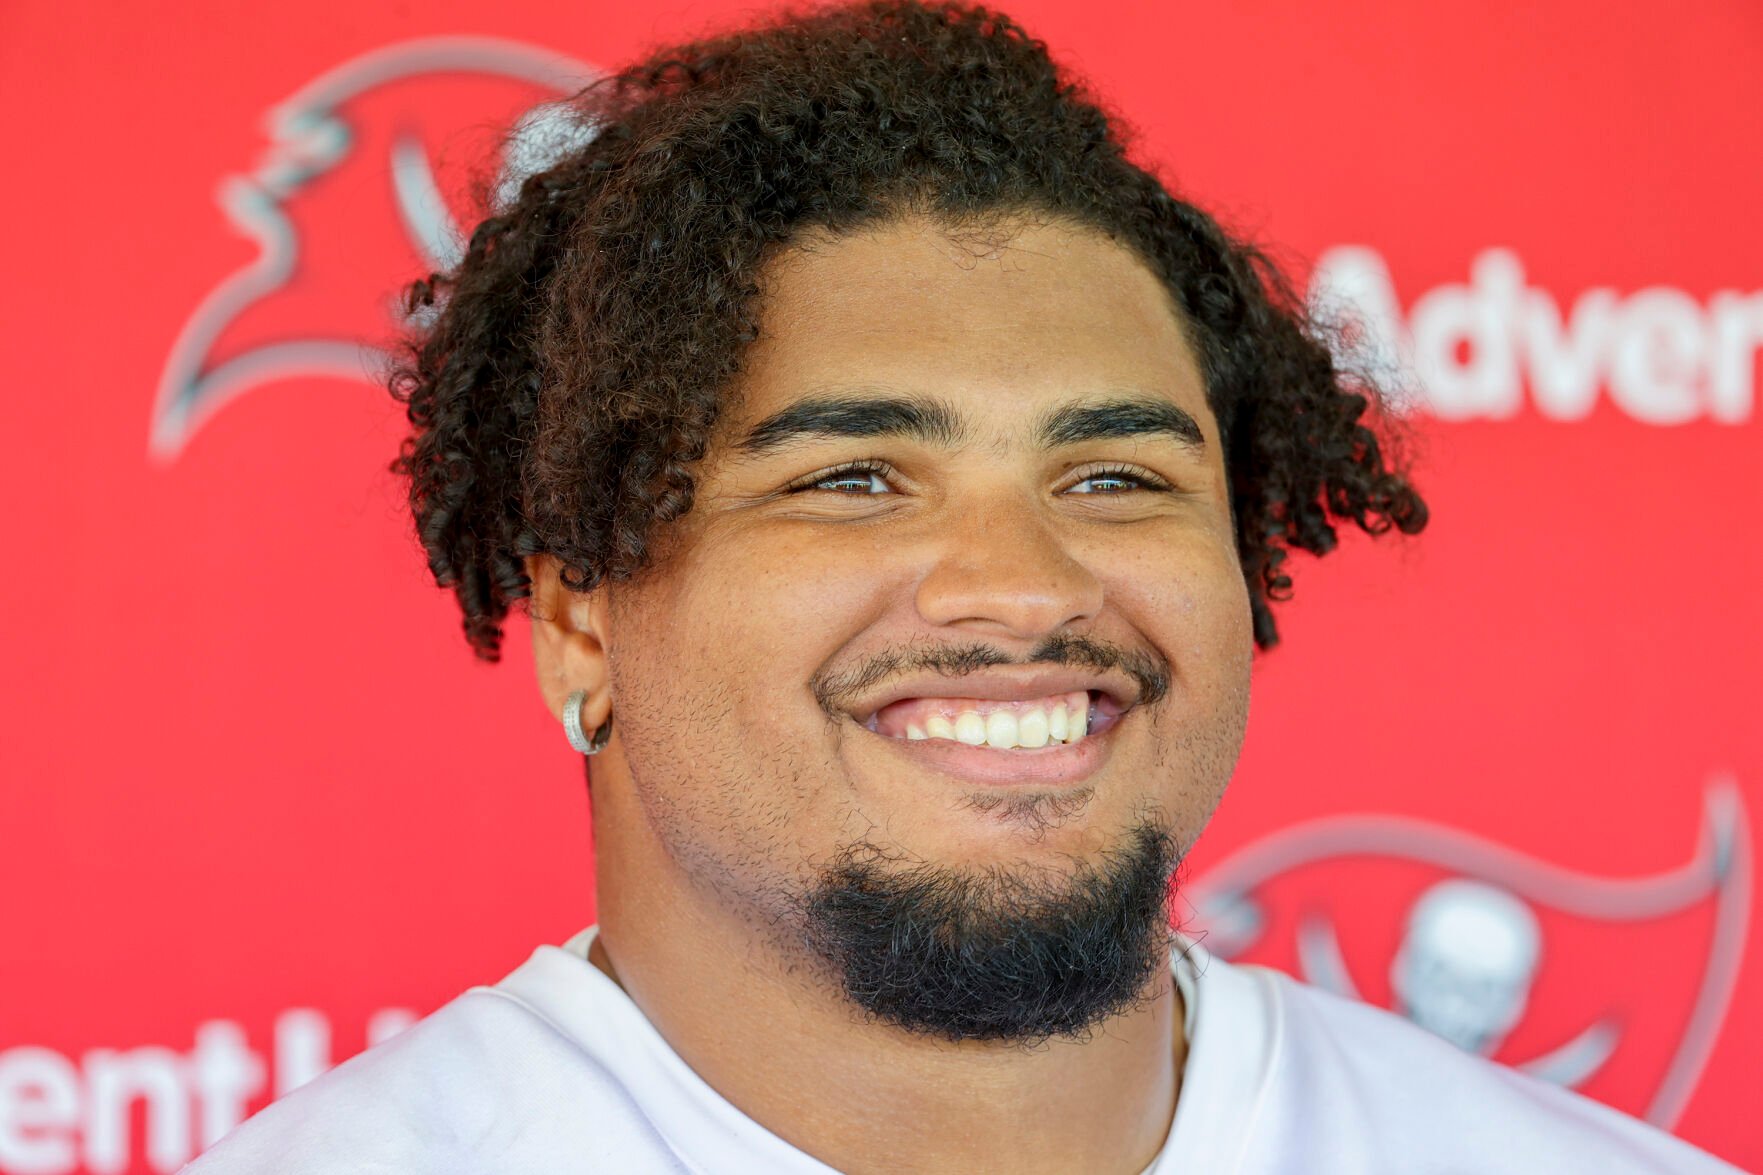 Bucs' Tristan Wirfs admits to anxiety over move to left side